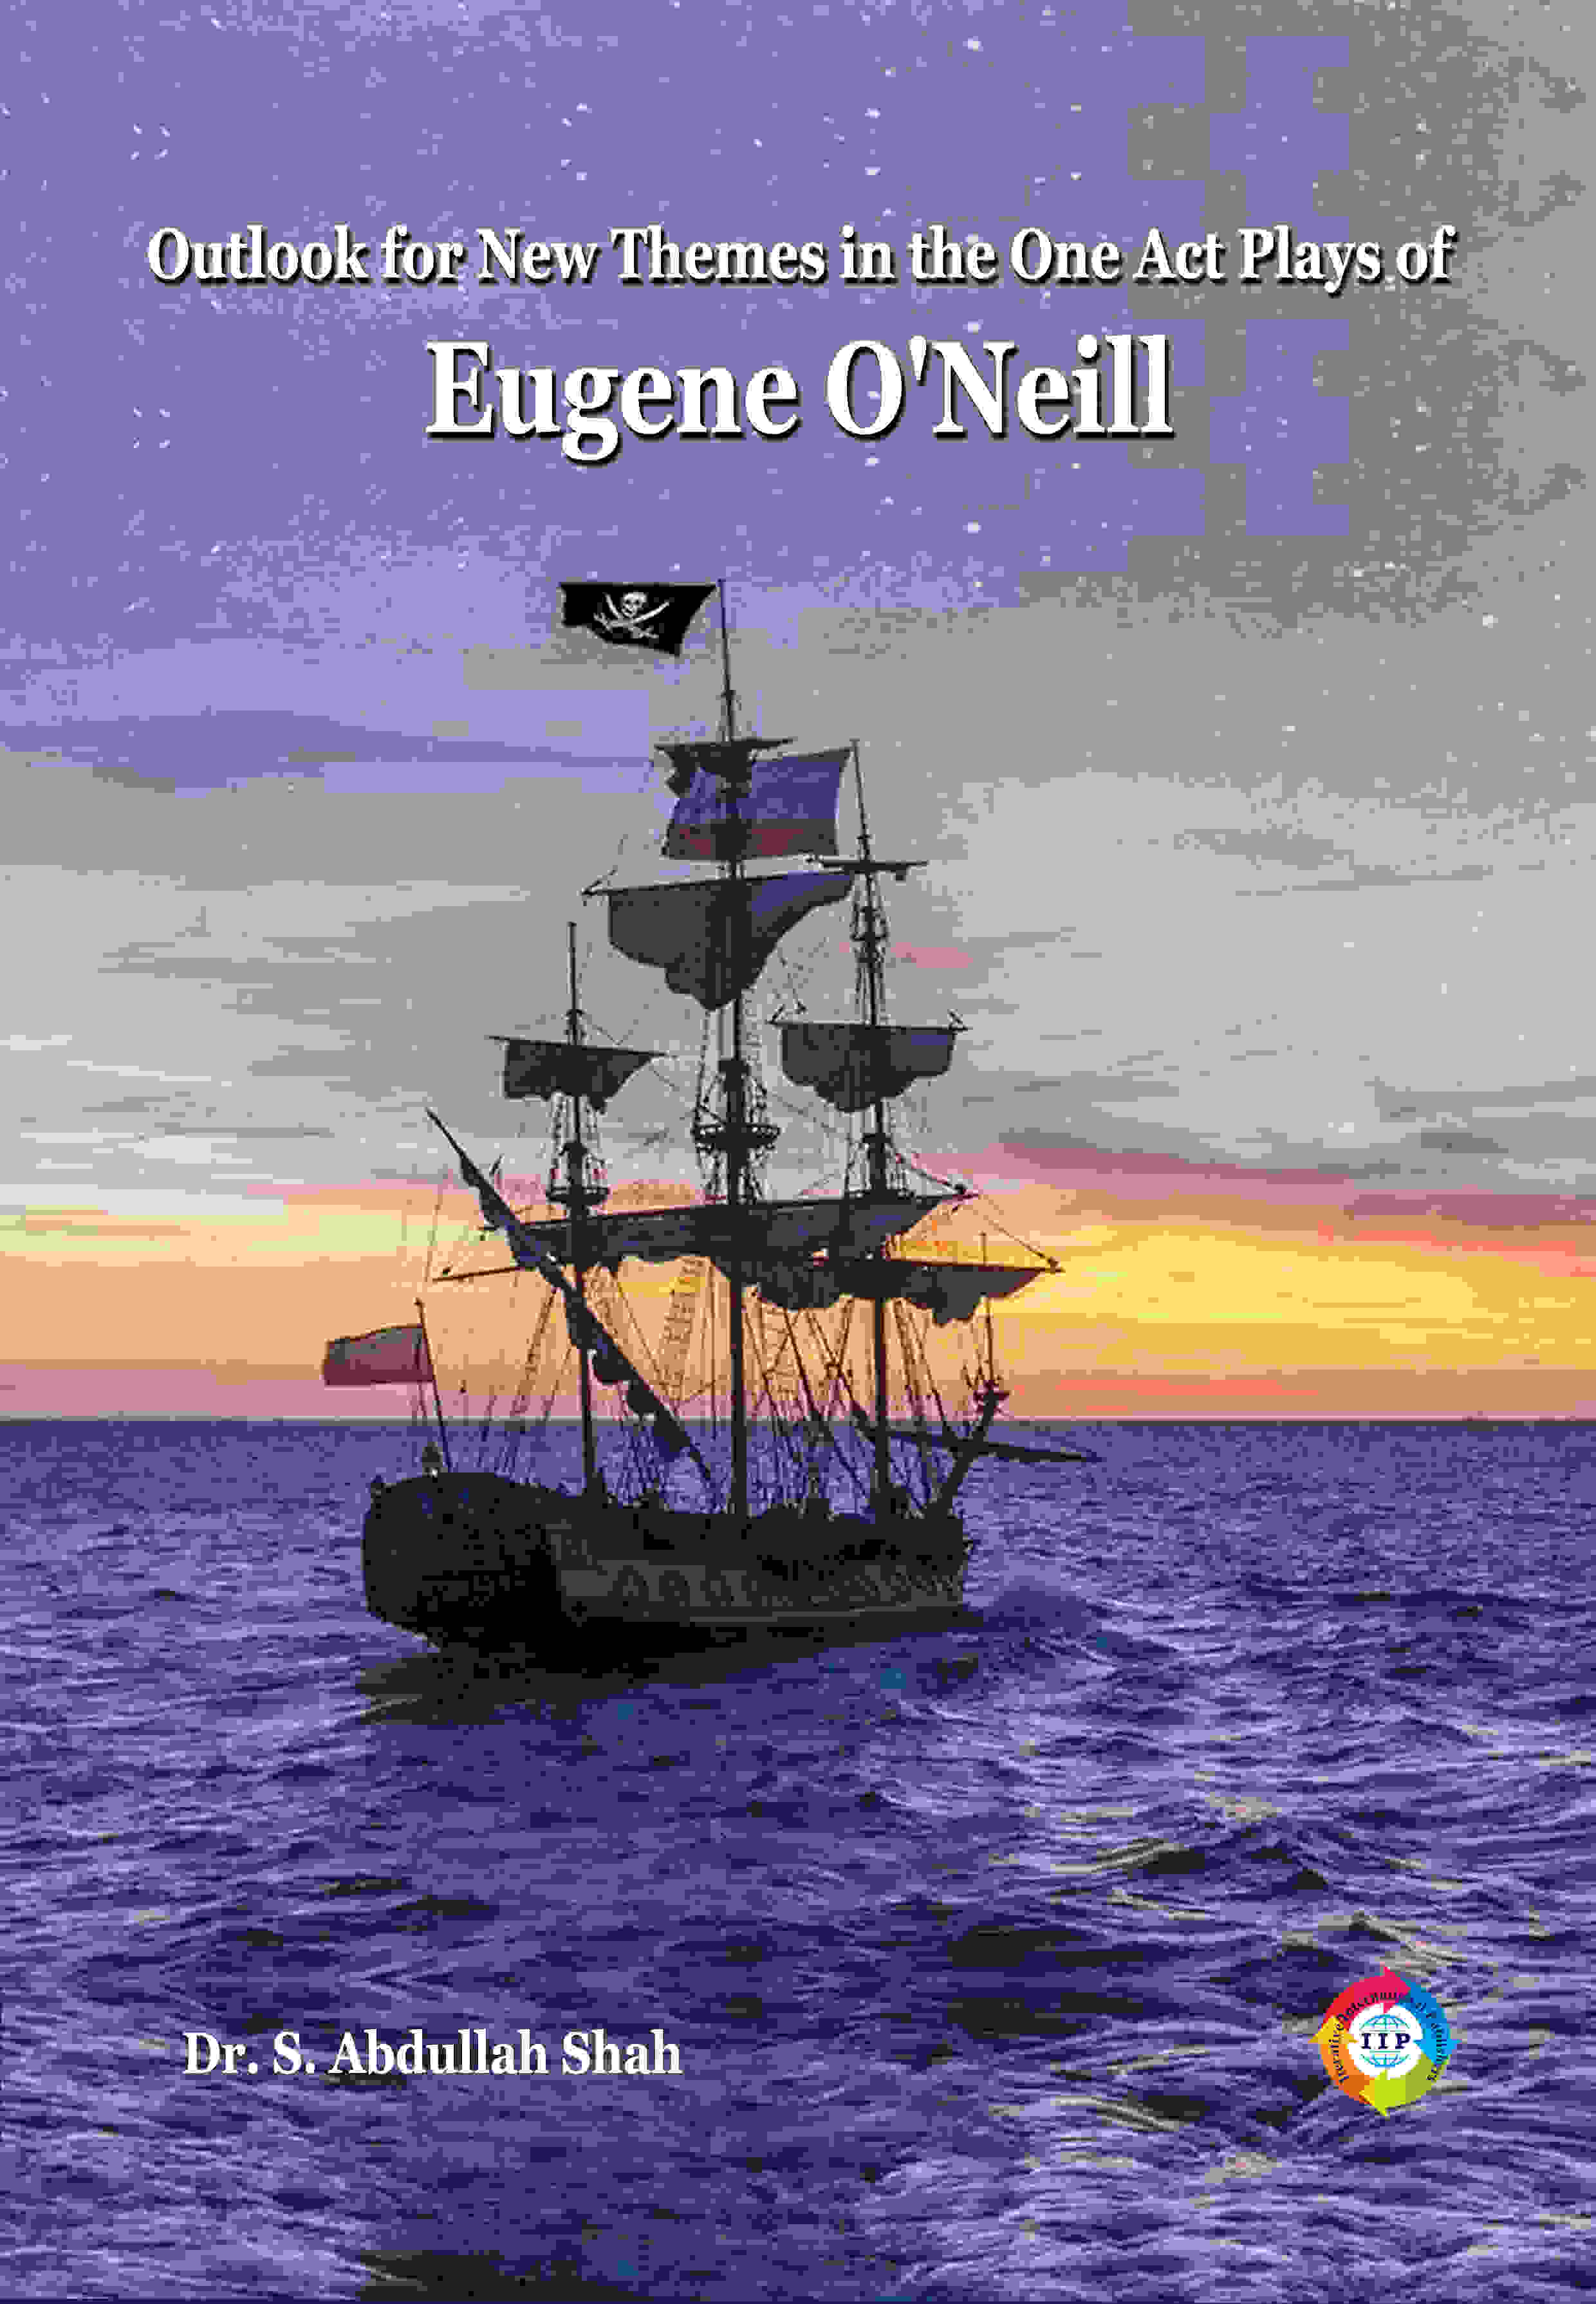 OUTLOOK FOR NEW THEMES IN THE ONE ACT PLAYS OF EUGENE O’NEILL